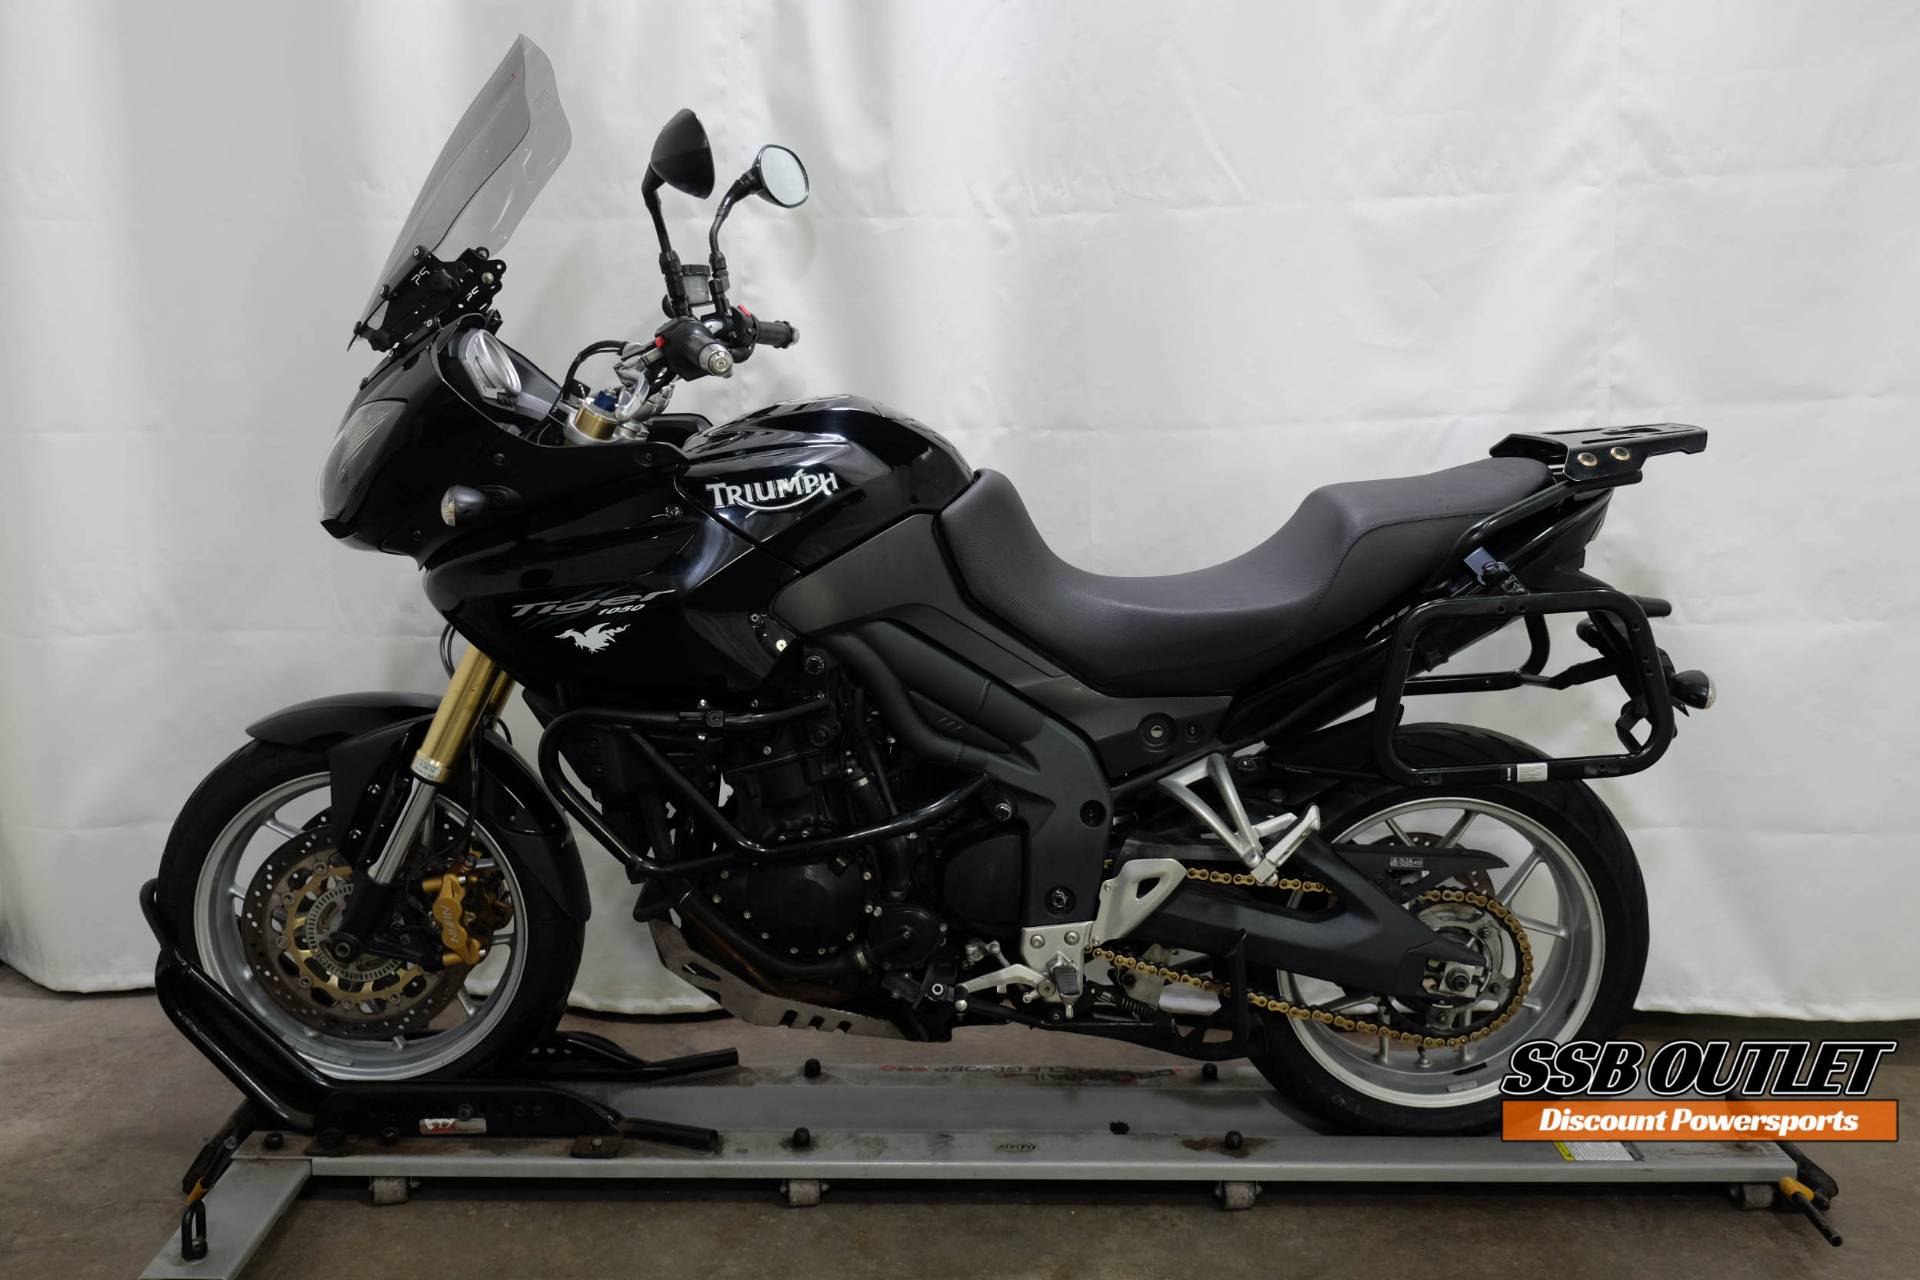 2008 Triumph Tiger 1050 Used Motorcycle For Sale Eden Prairie Mn Simply Street Bikes